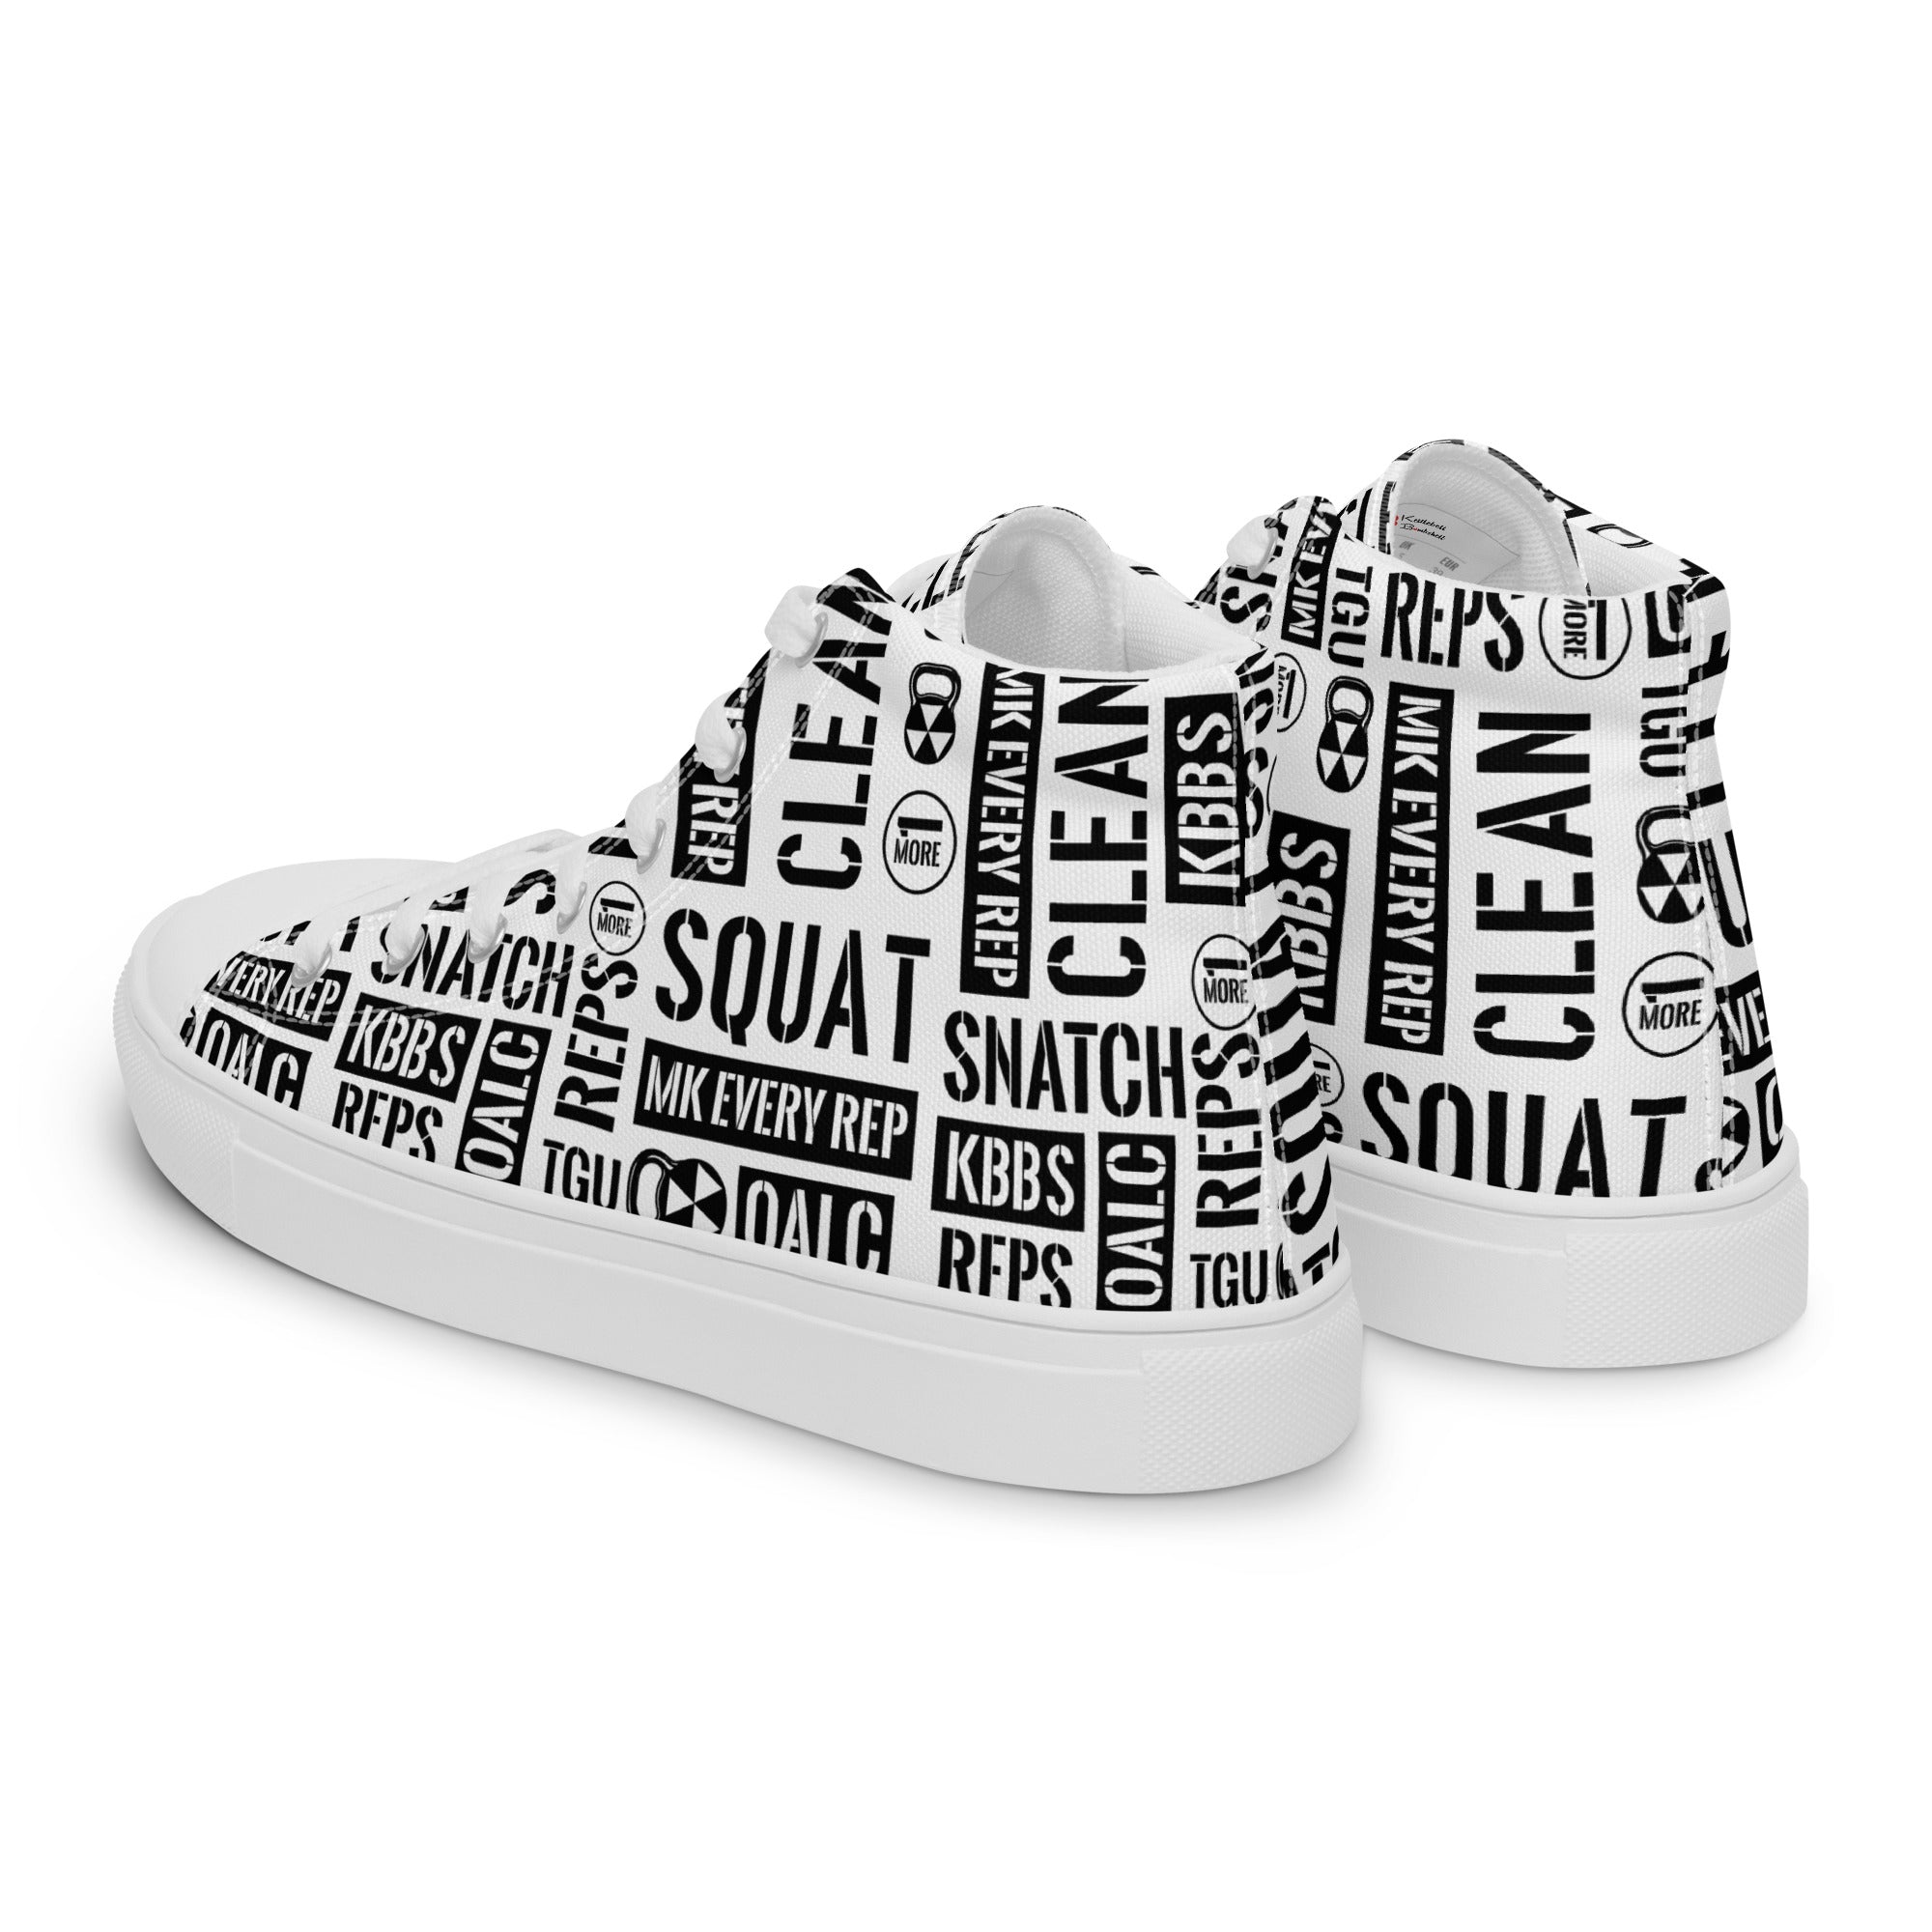 Men’s White Acronyms High Top Canvas Shoes